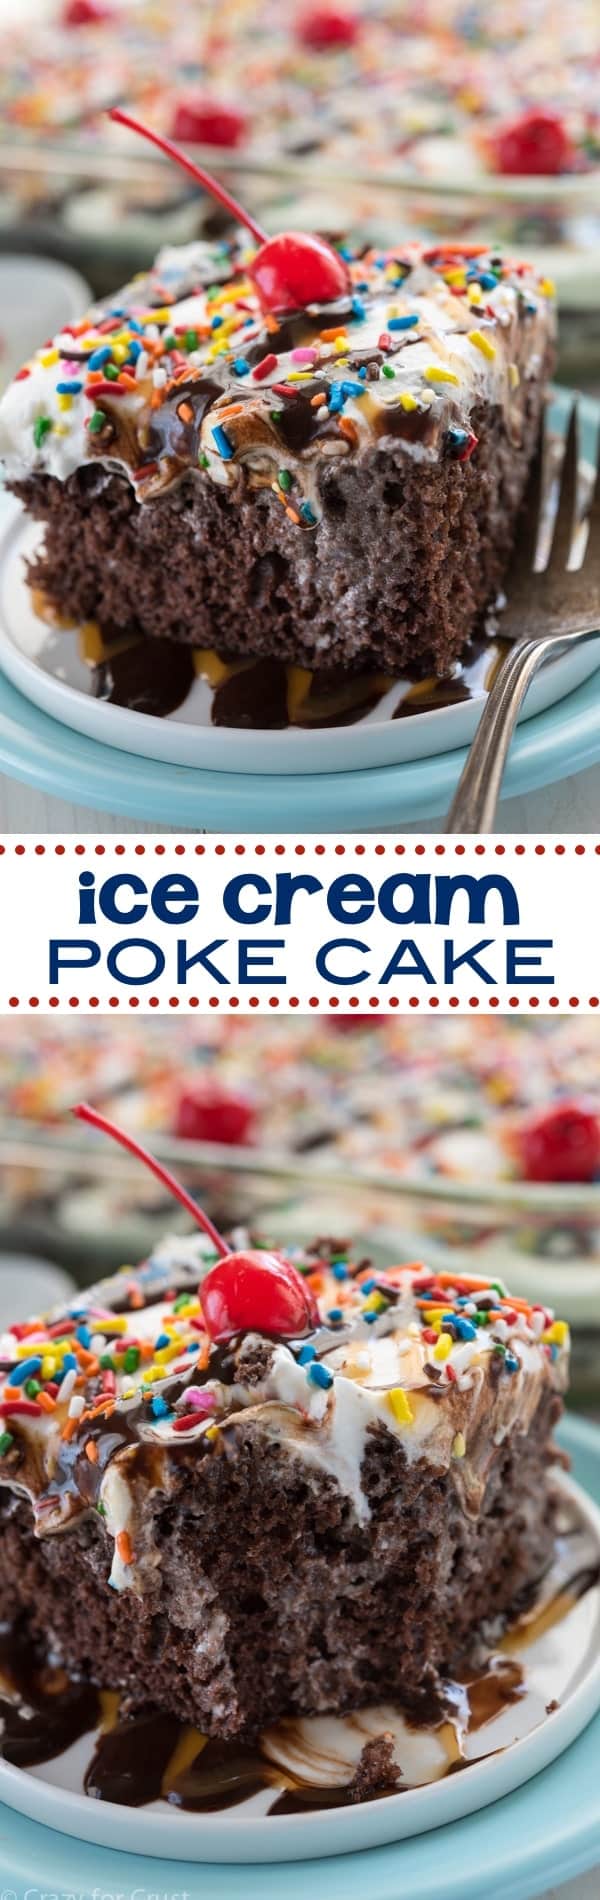 Ice cream poke cake collage with words in the middle